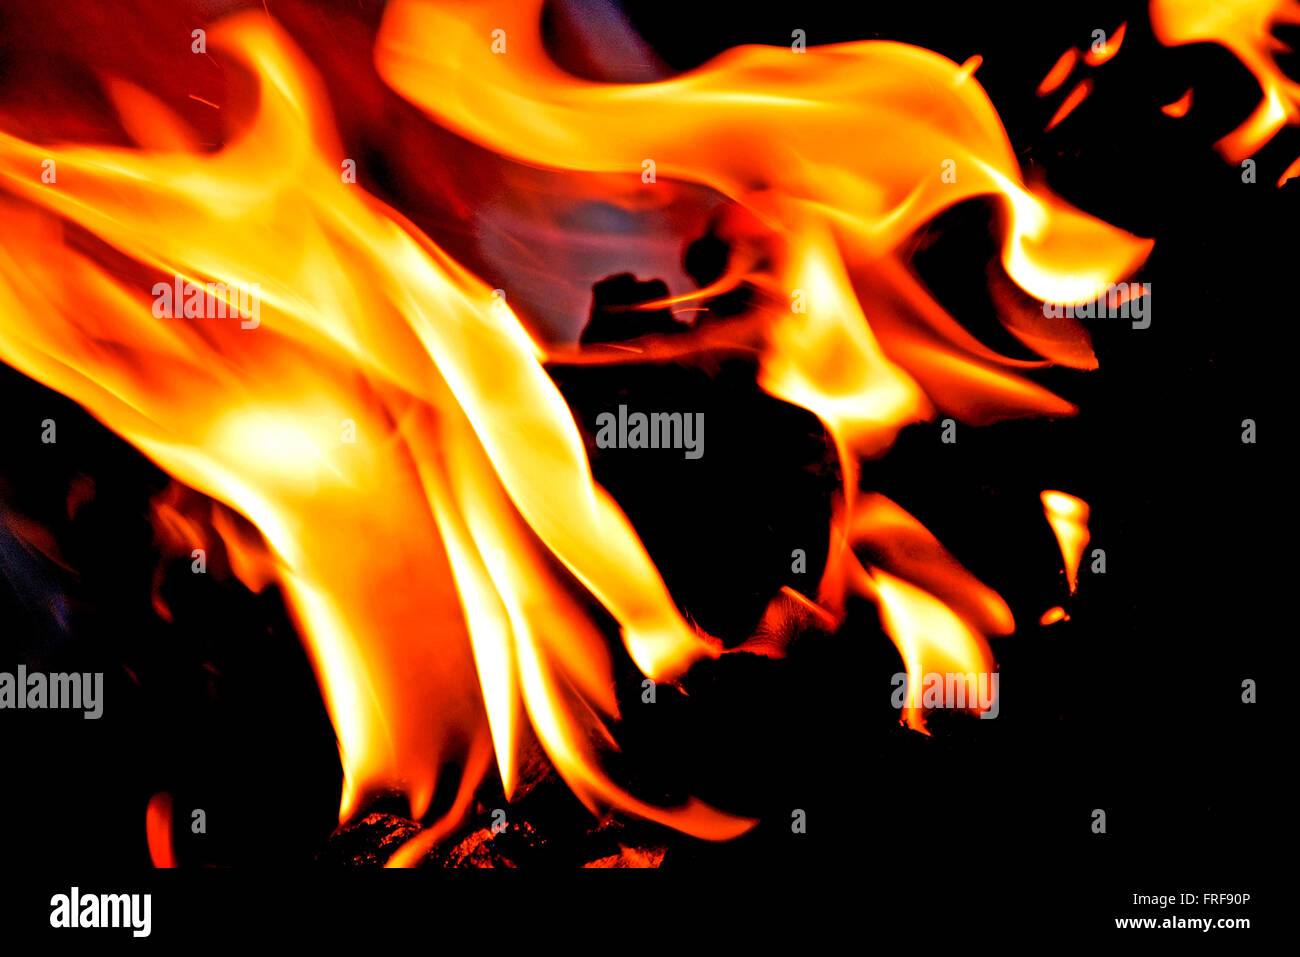 Fire flames on a black background Stock Photo